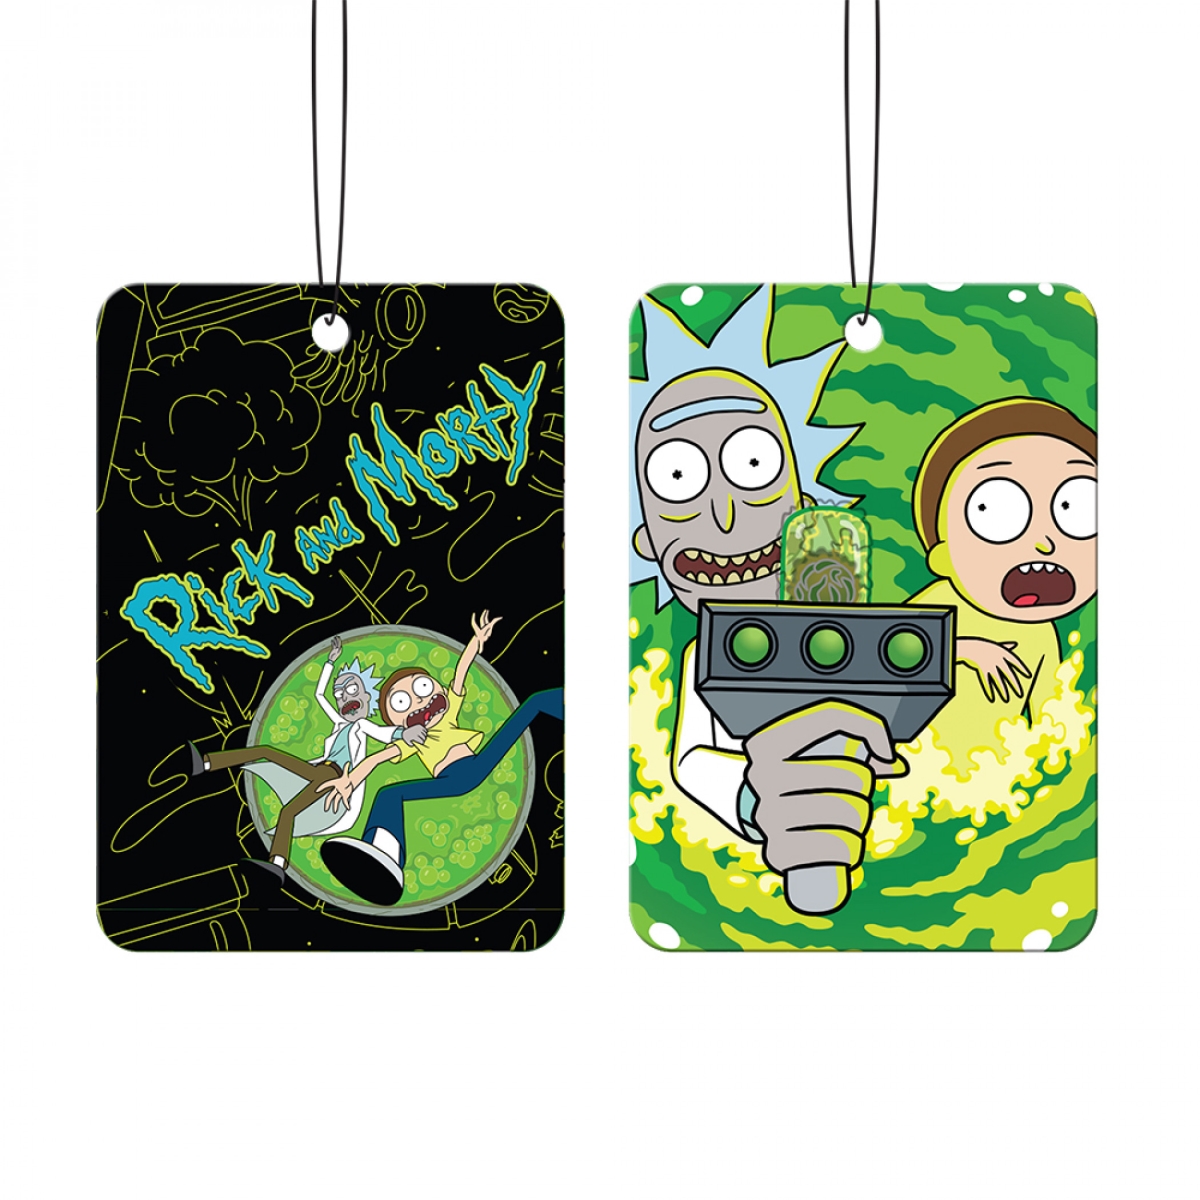 Picture of Rick & Morty 846420 Rick & Morty Characters with Portal Gun Air Freshener - Pack of 2